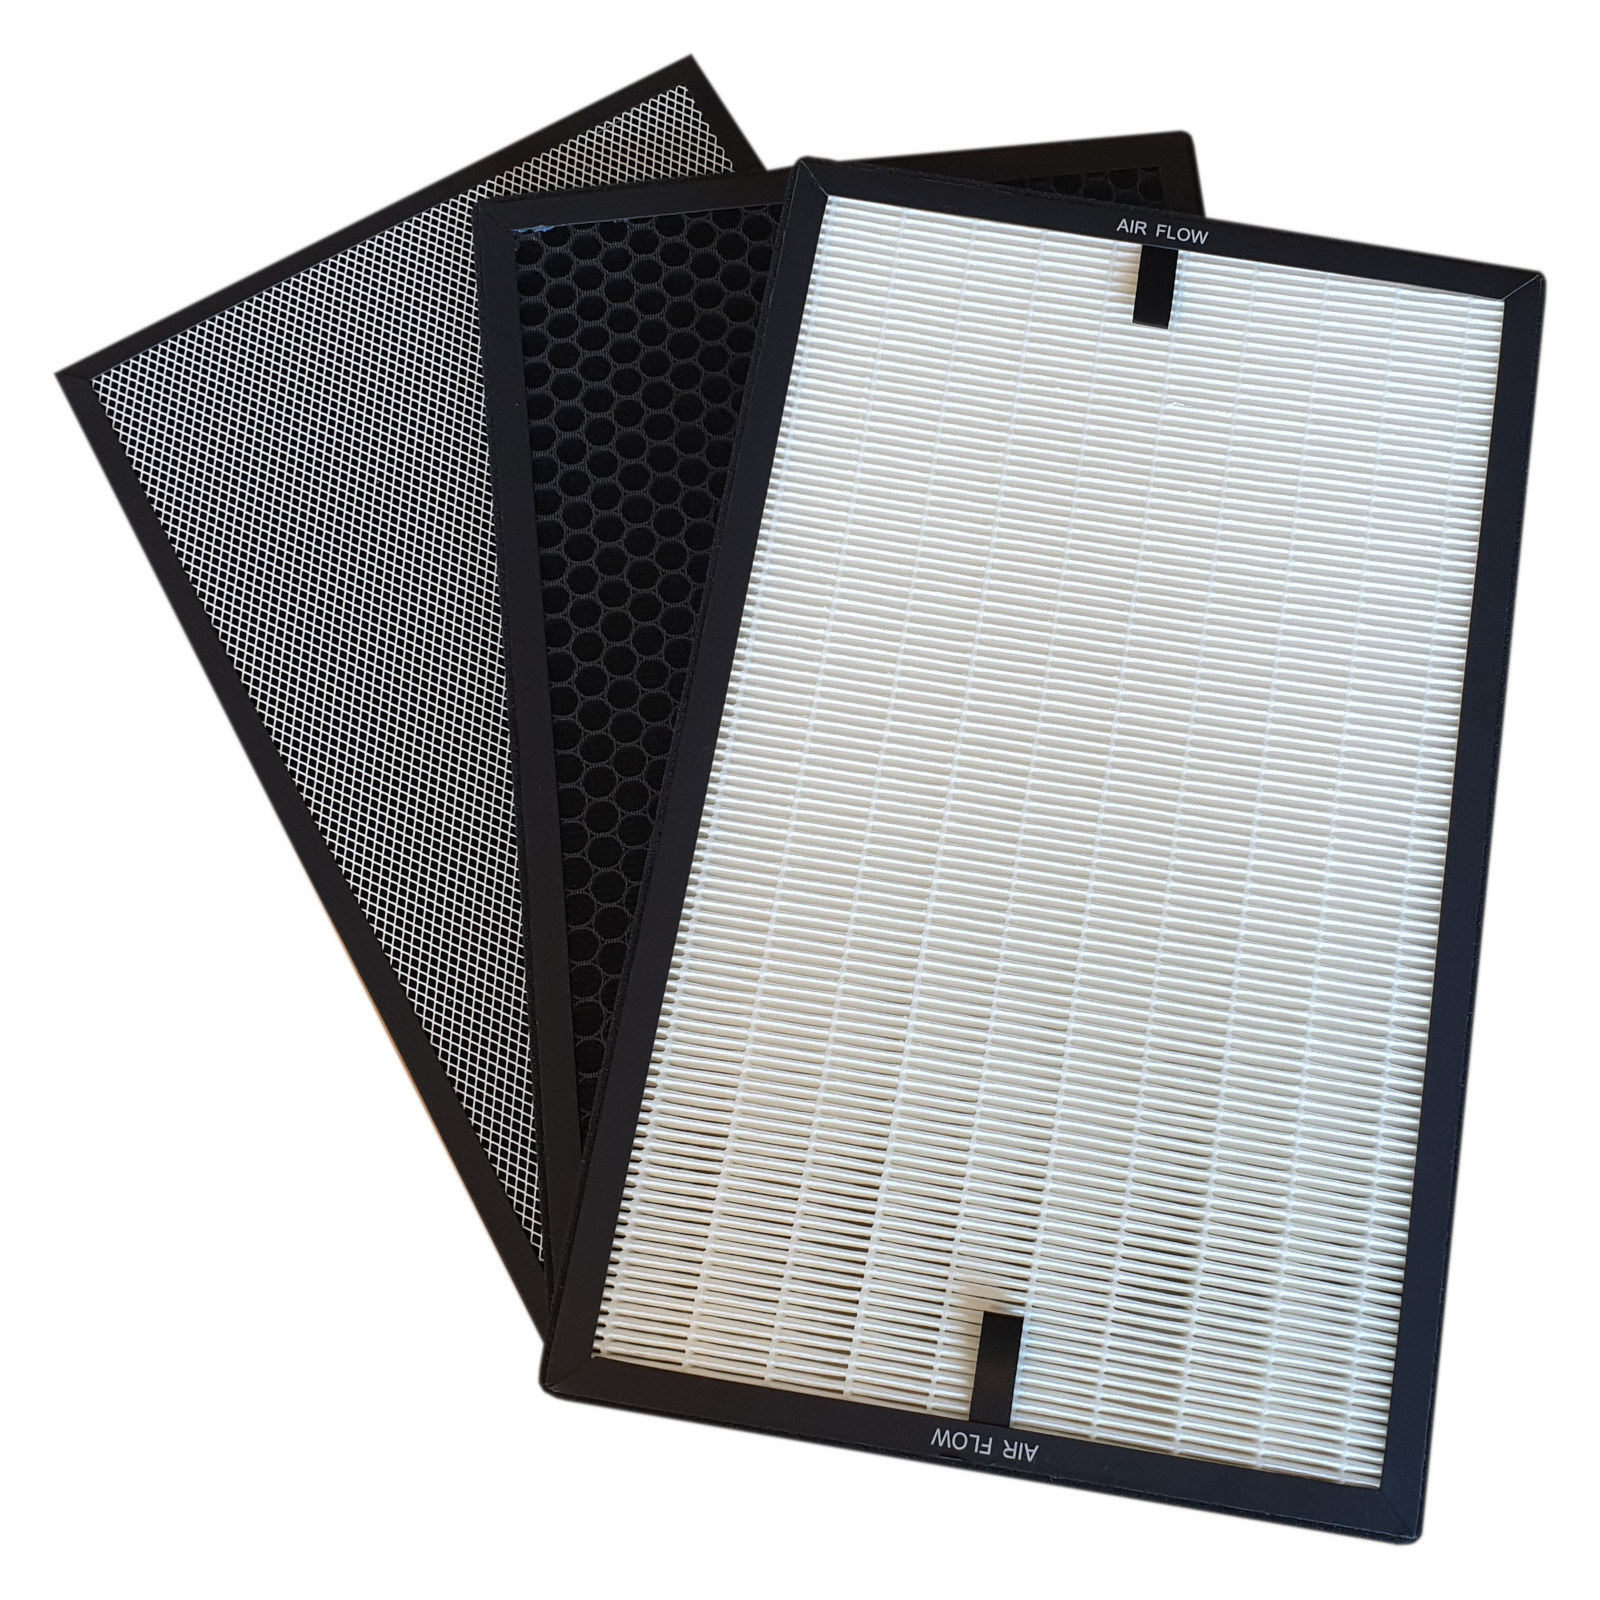 Filter set for air purifier B-785 and B-H03